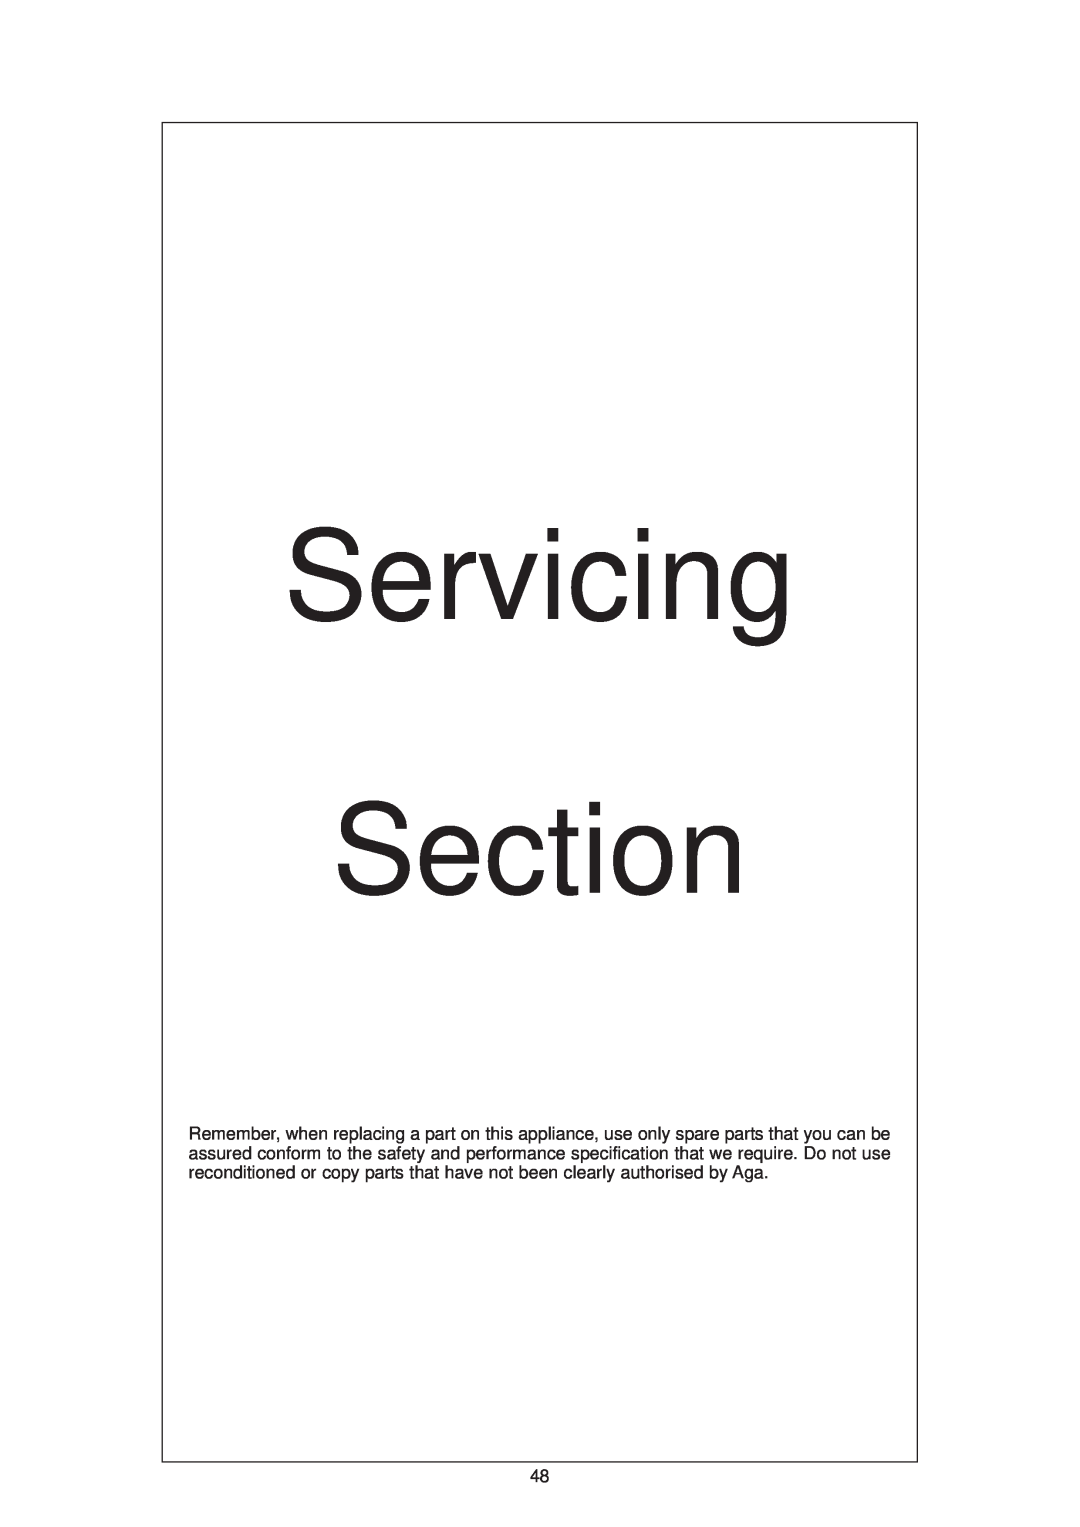 Aga Ranges DESN 512387 A owner manual Servicing Section 